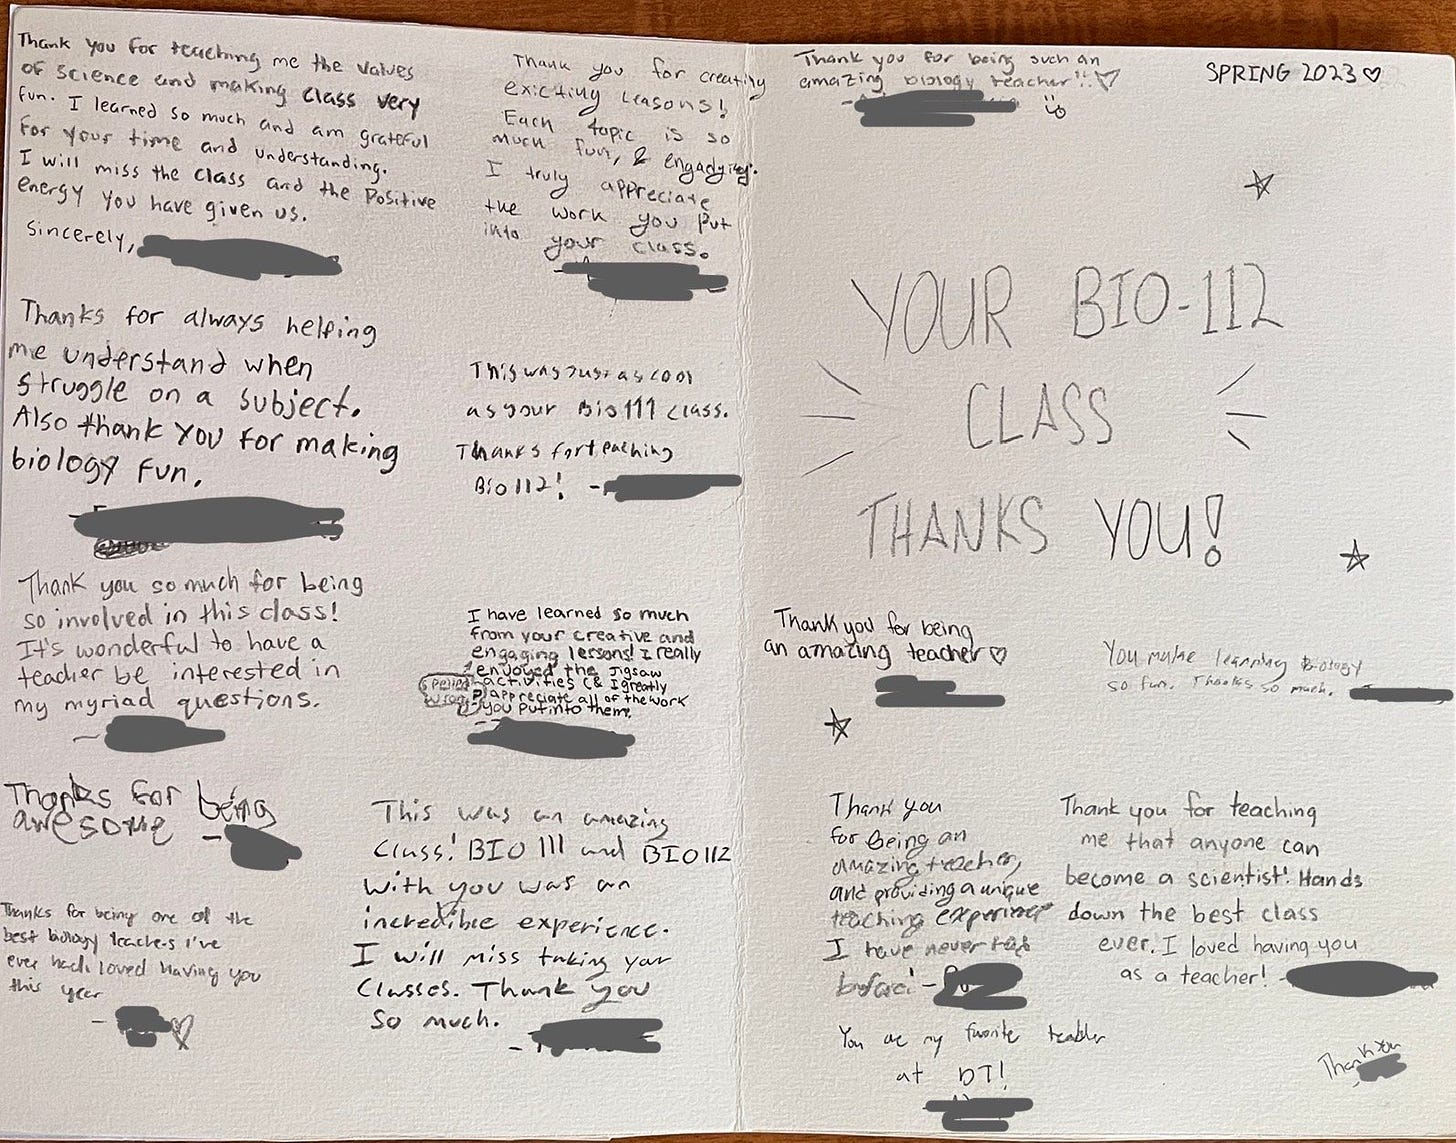 Image of the inside of the handwritten card my students presented to me at the end of the semester. Each student wrote a short note of thanks.